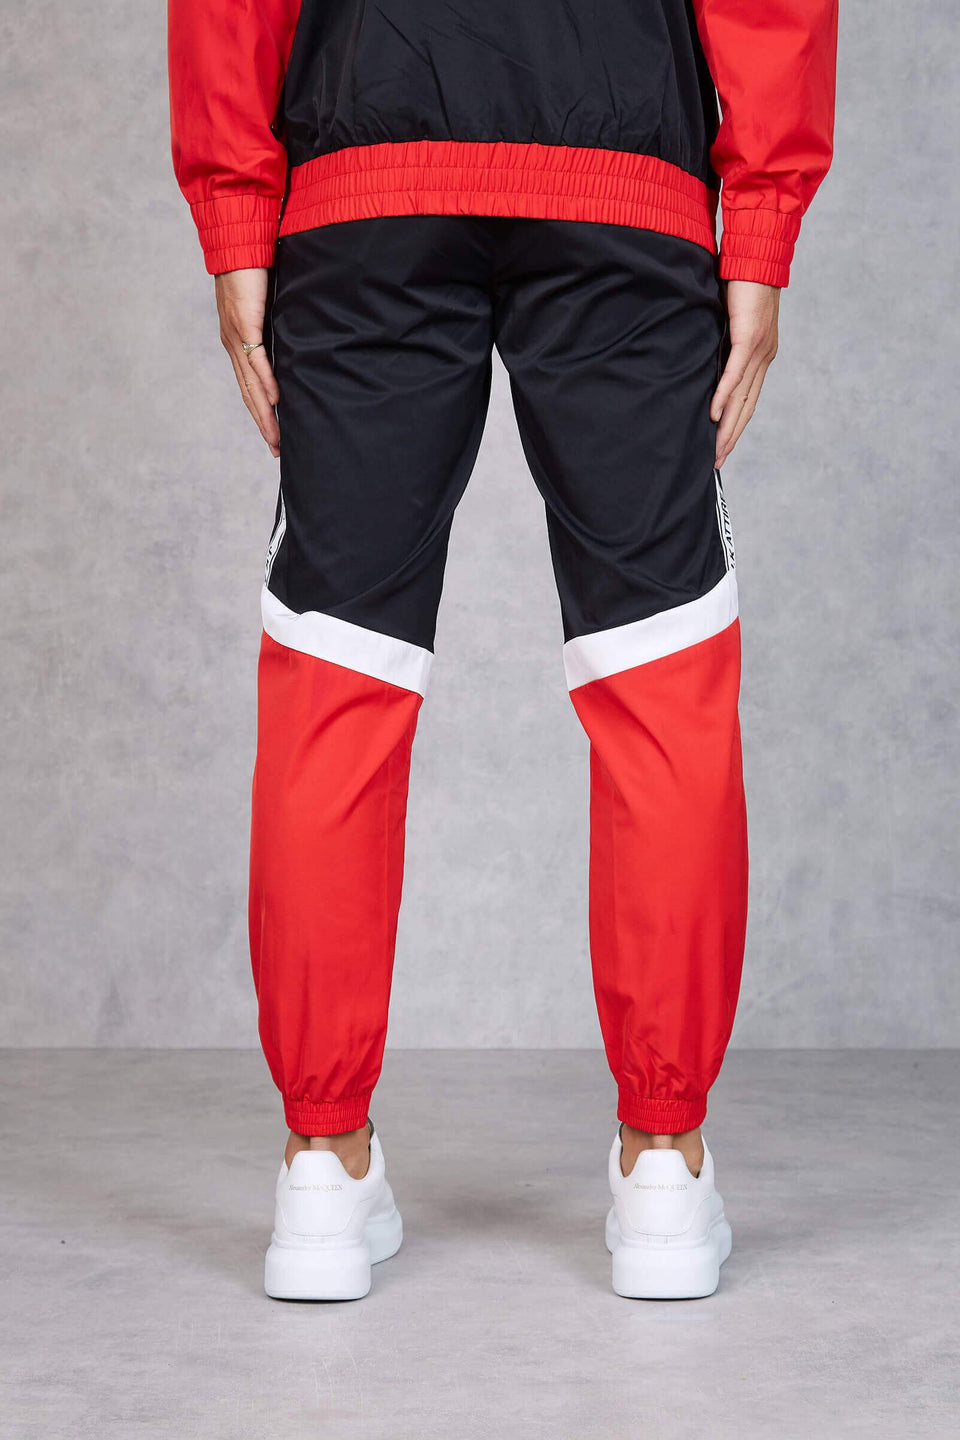 Section Retro Taped Jogging Pant - Red/Black